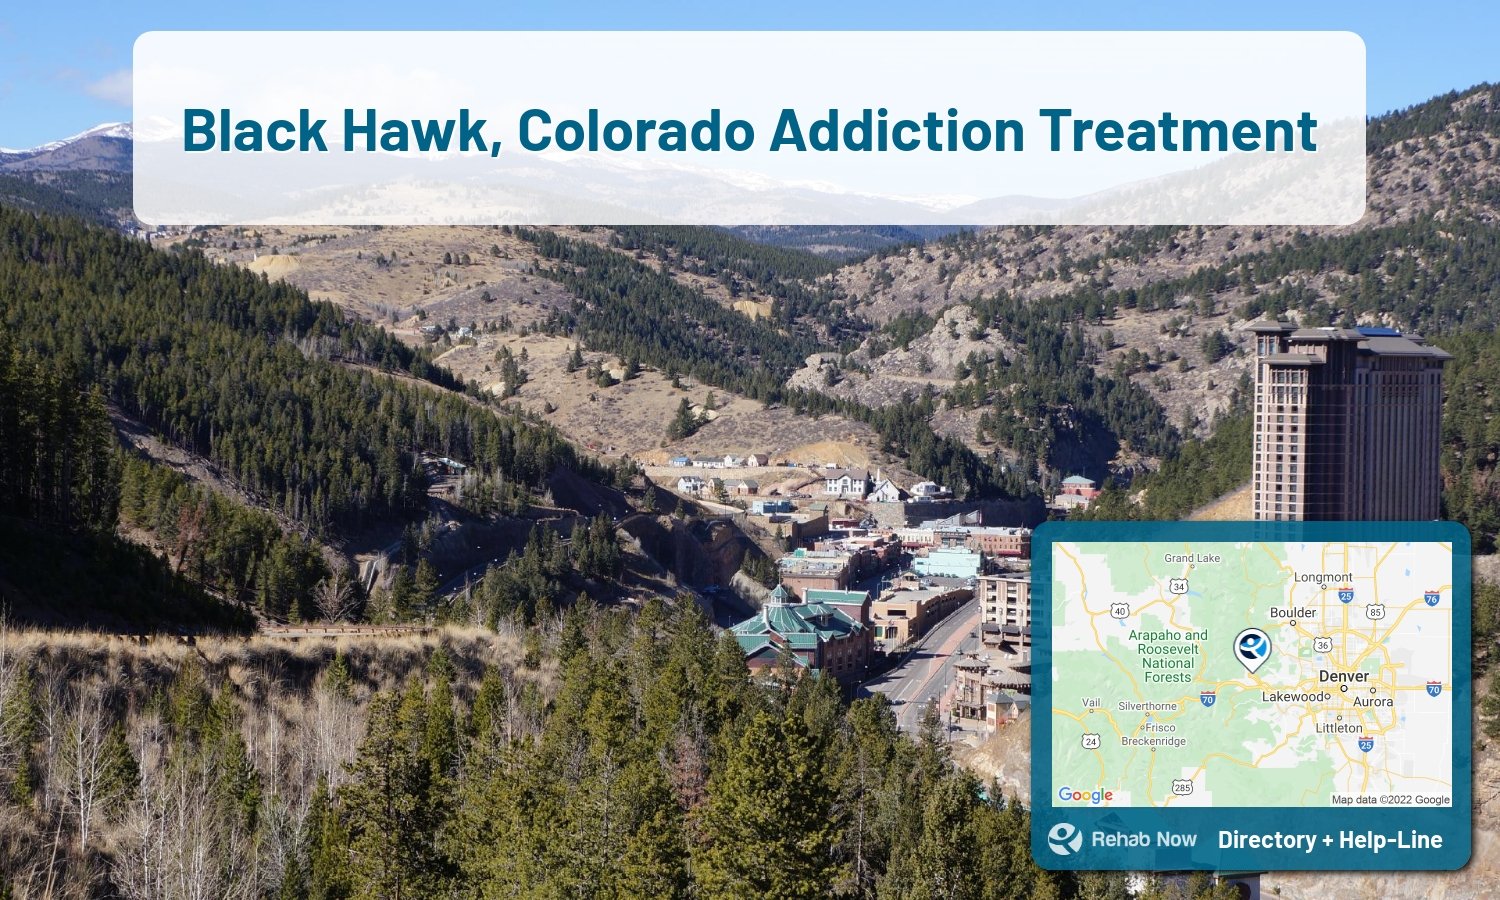 View options, availability, treatment methods, and more, for drug rehab and alcohol treatment in Black Hawk, Colorado